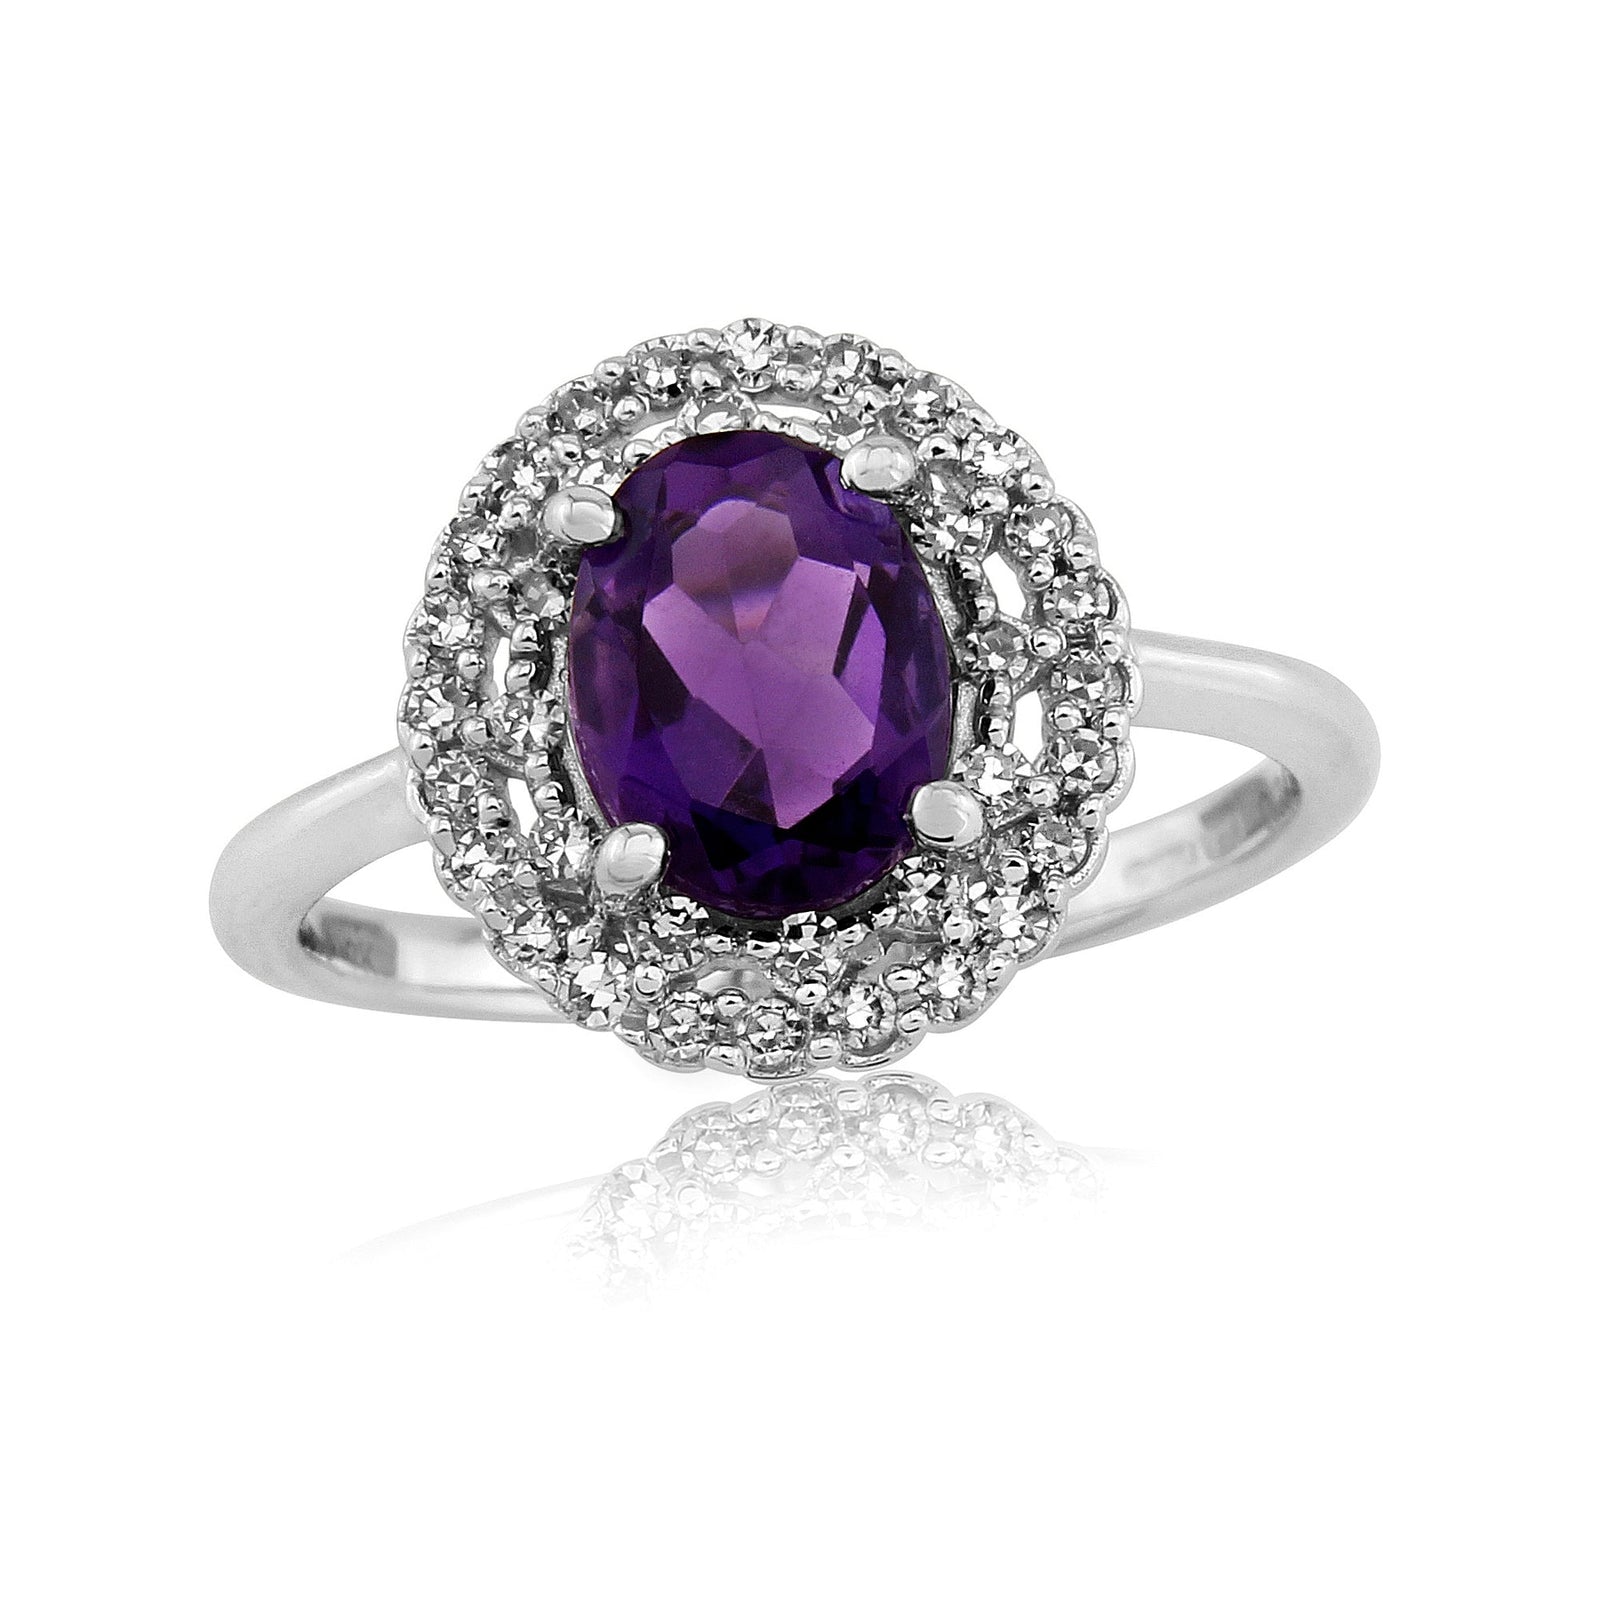 9ct white gold 8x6mm oval amethyst & diamond 2 row cluster ring 0.24ct